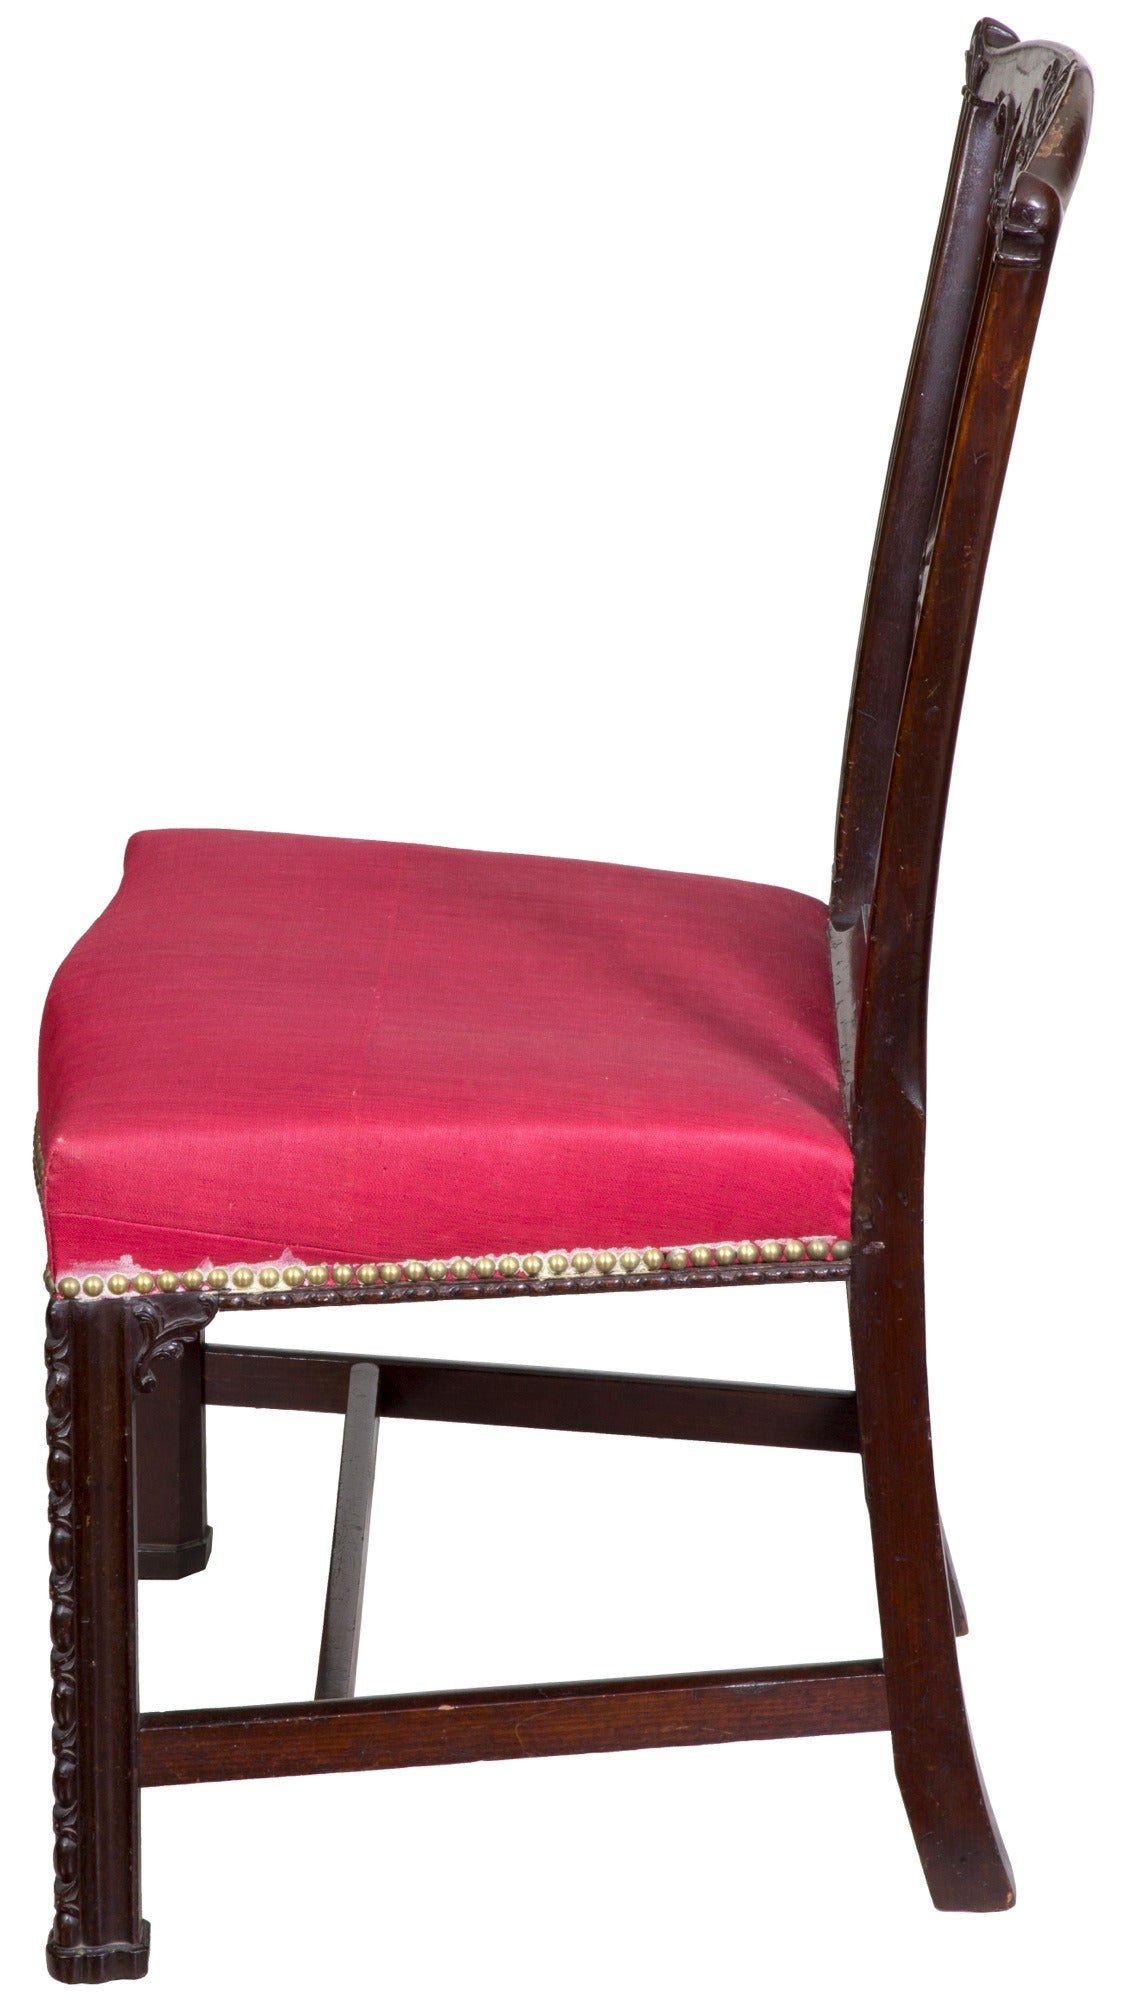 British Exquisite Chippendale George II Mahogany Side Chair, England, circa 1780